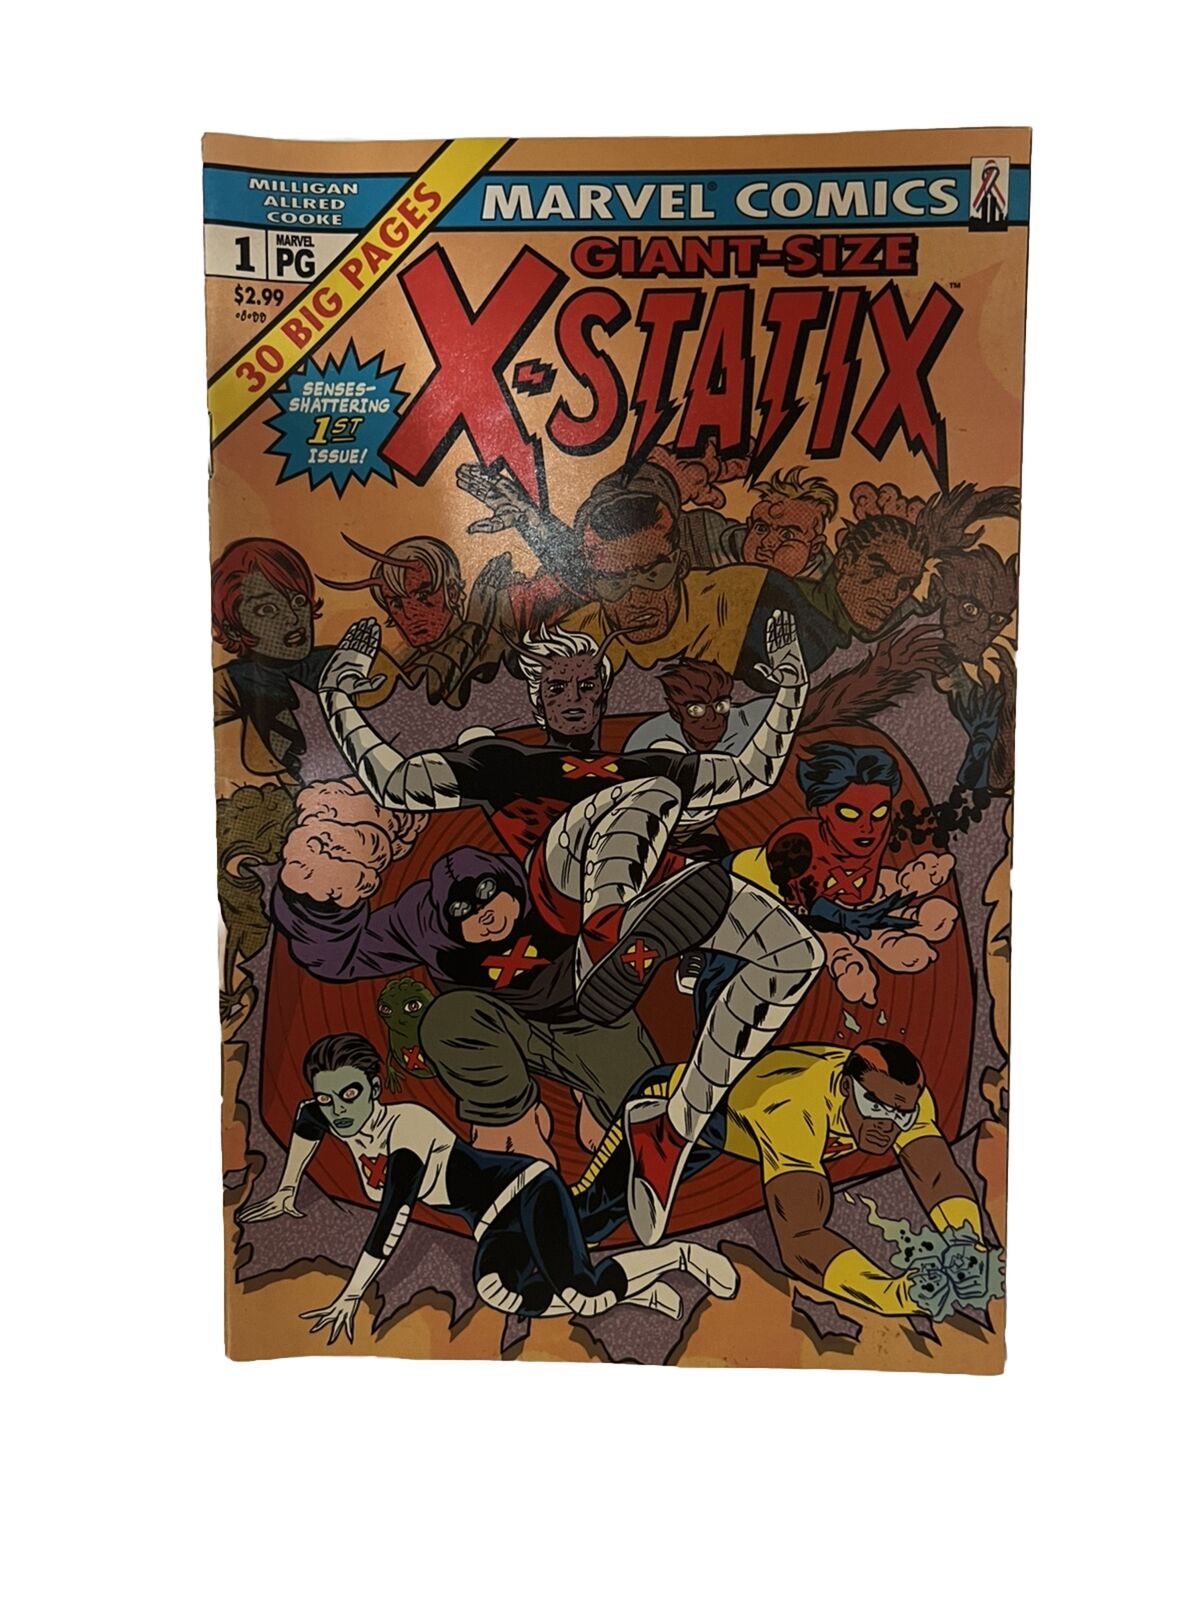 X-STATIX GIANT-SIZE #1 MARVEL COMICS 30 Big Pages 1st Issue